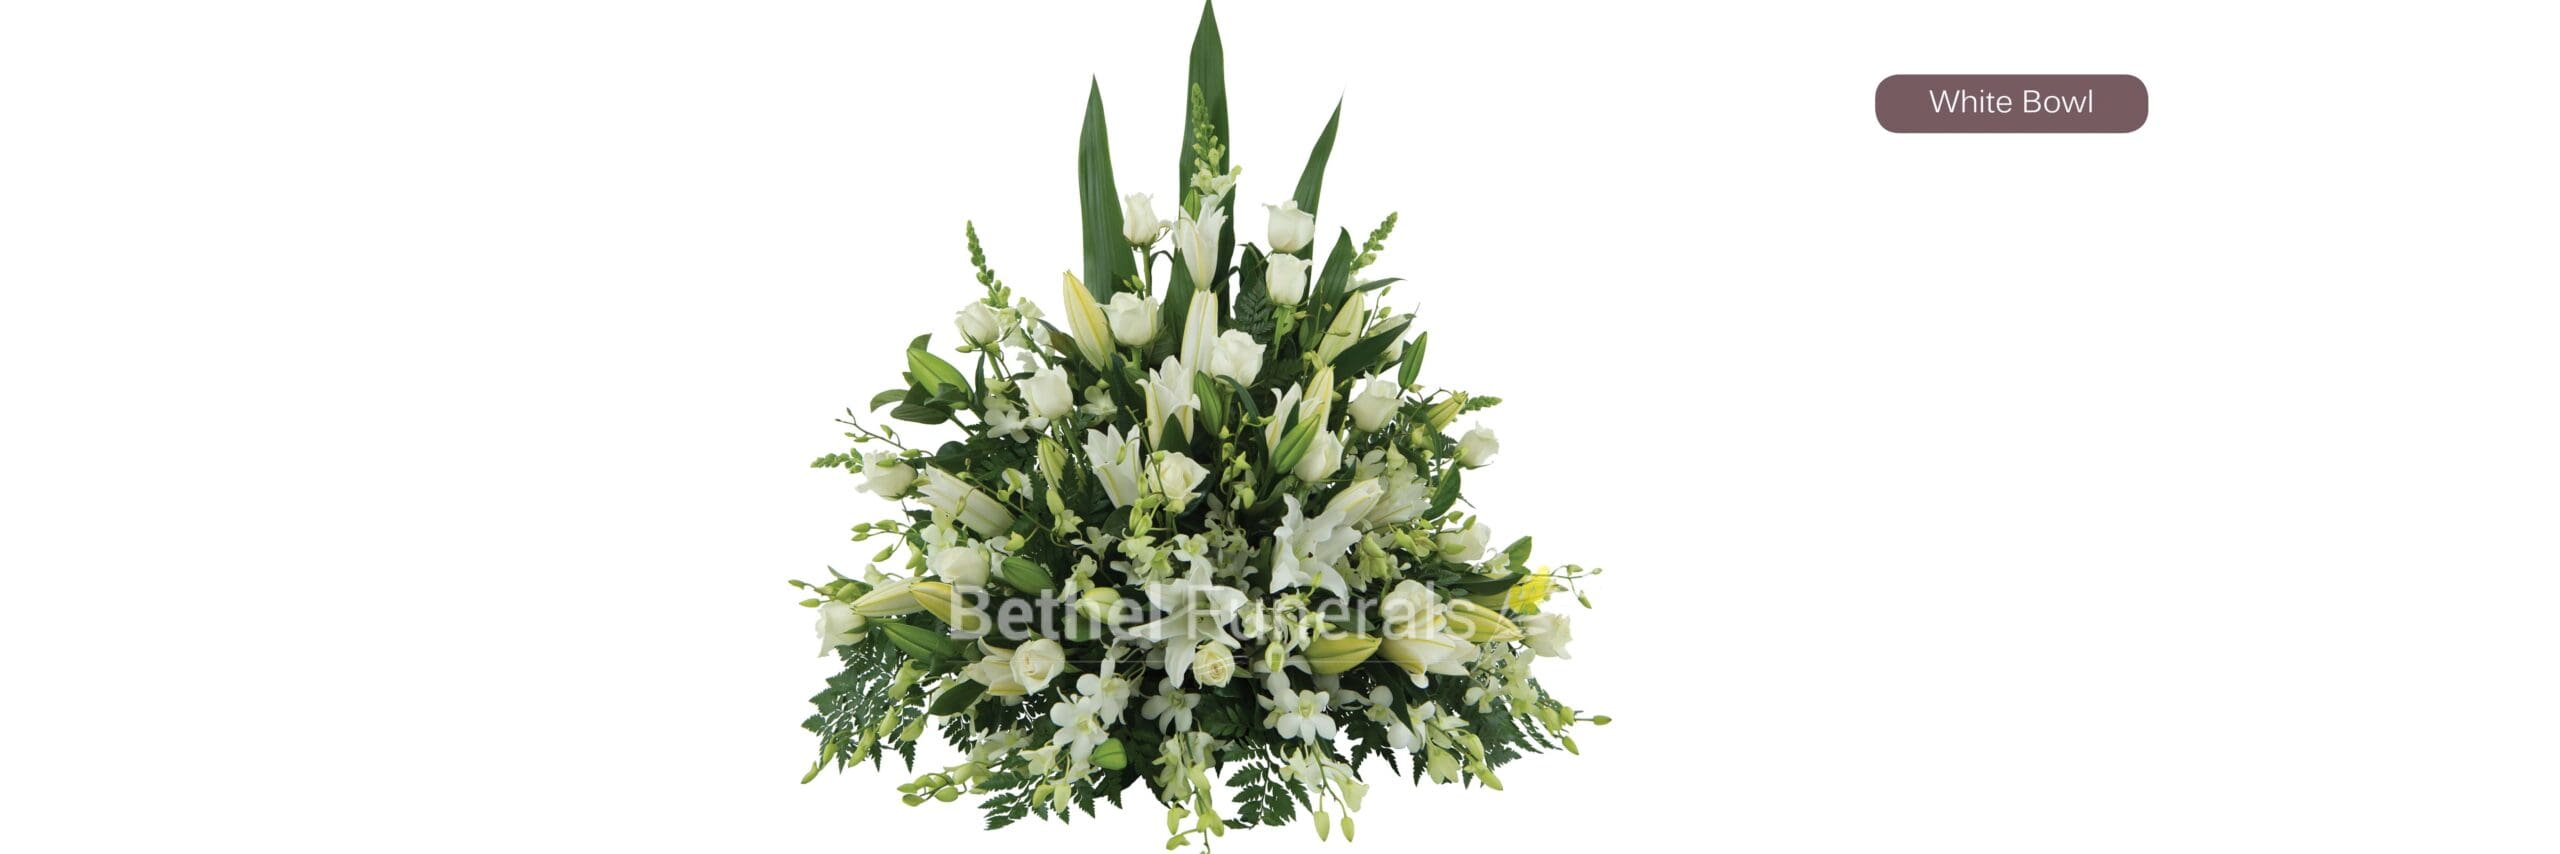 White Bowl Funeral Flowers